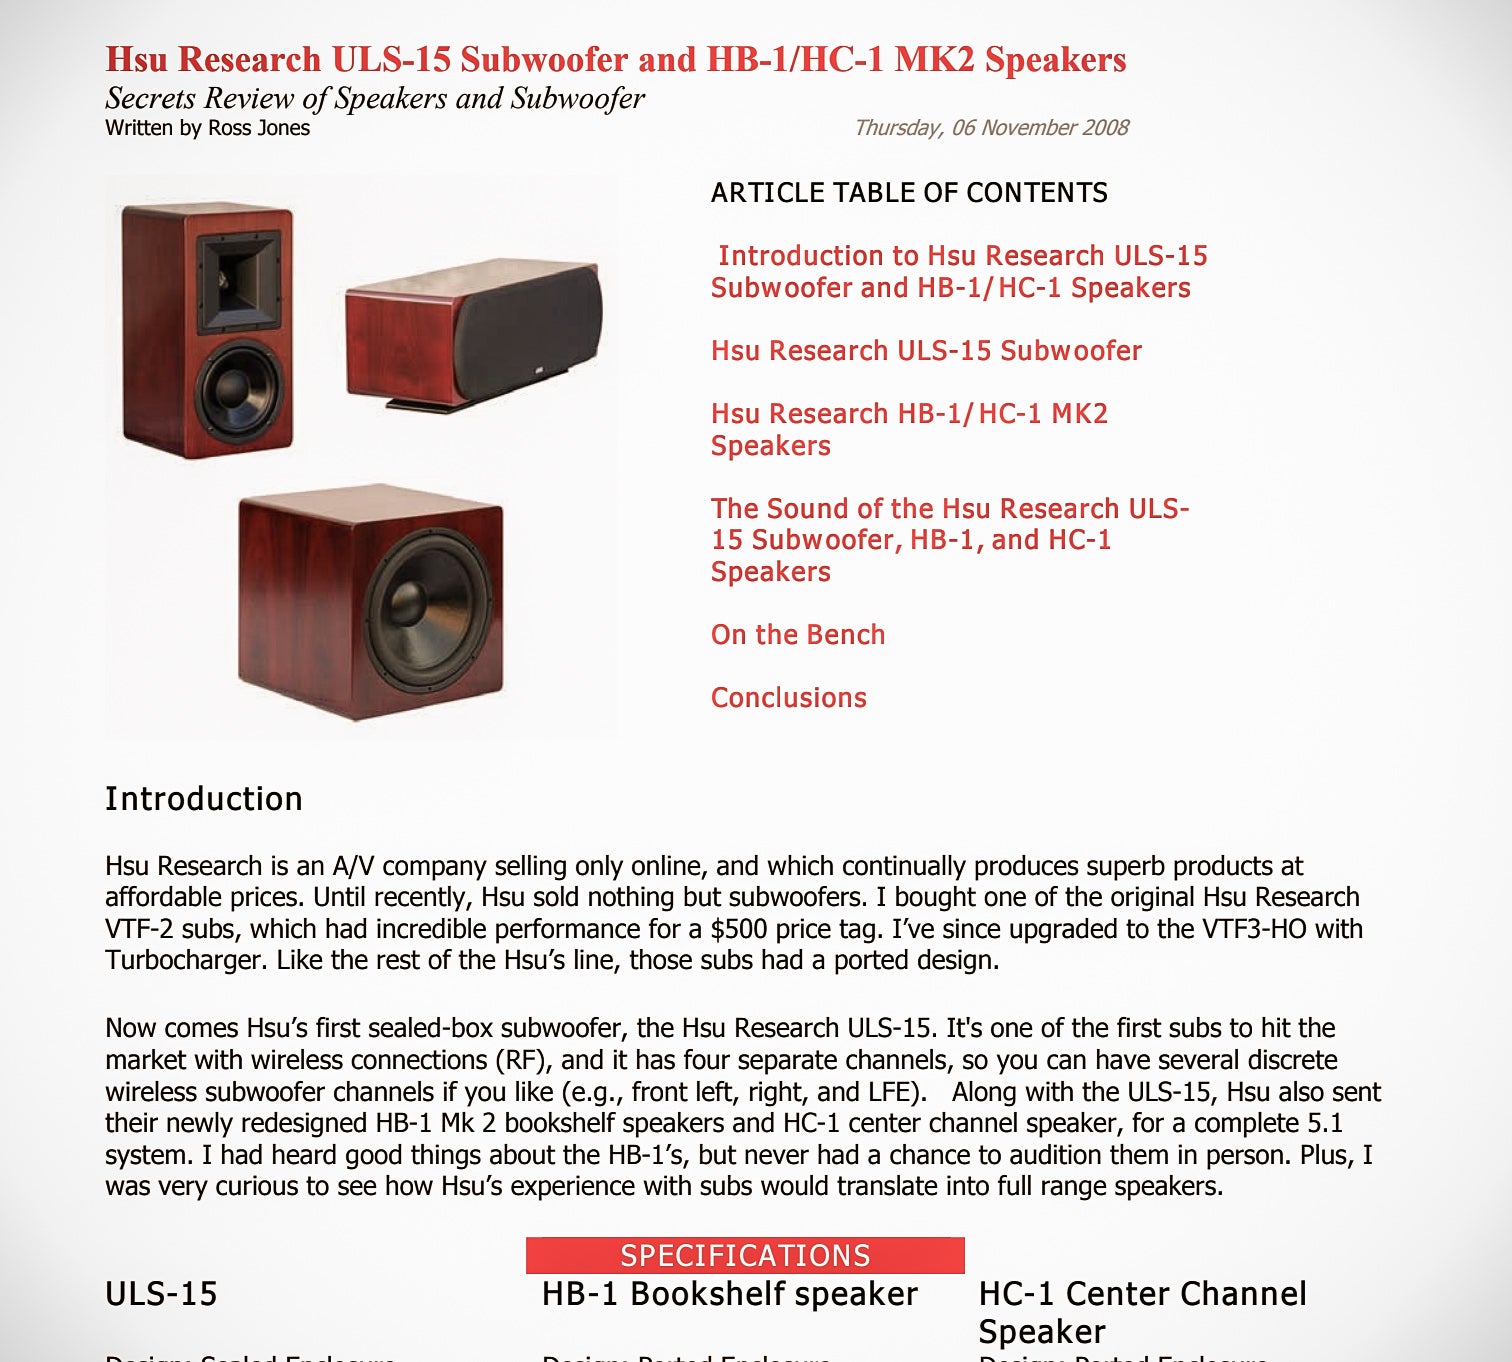 High Fidelity 2008: ULS-15 Subwoofer and HB-1/HC-1 MK2 Speakers